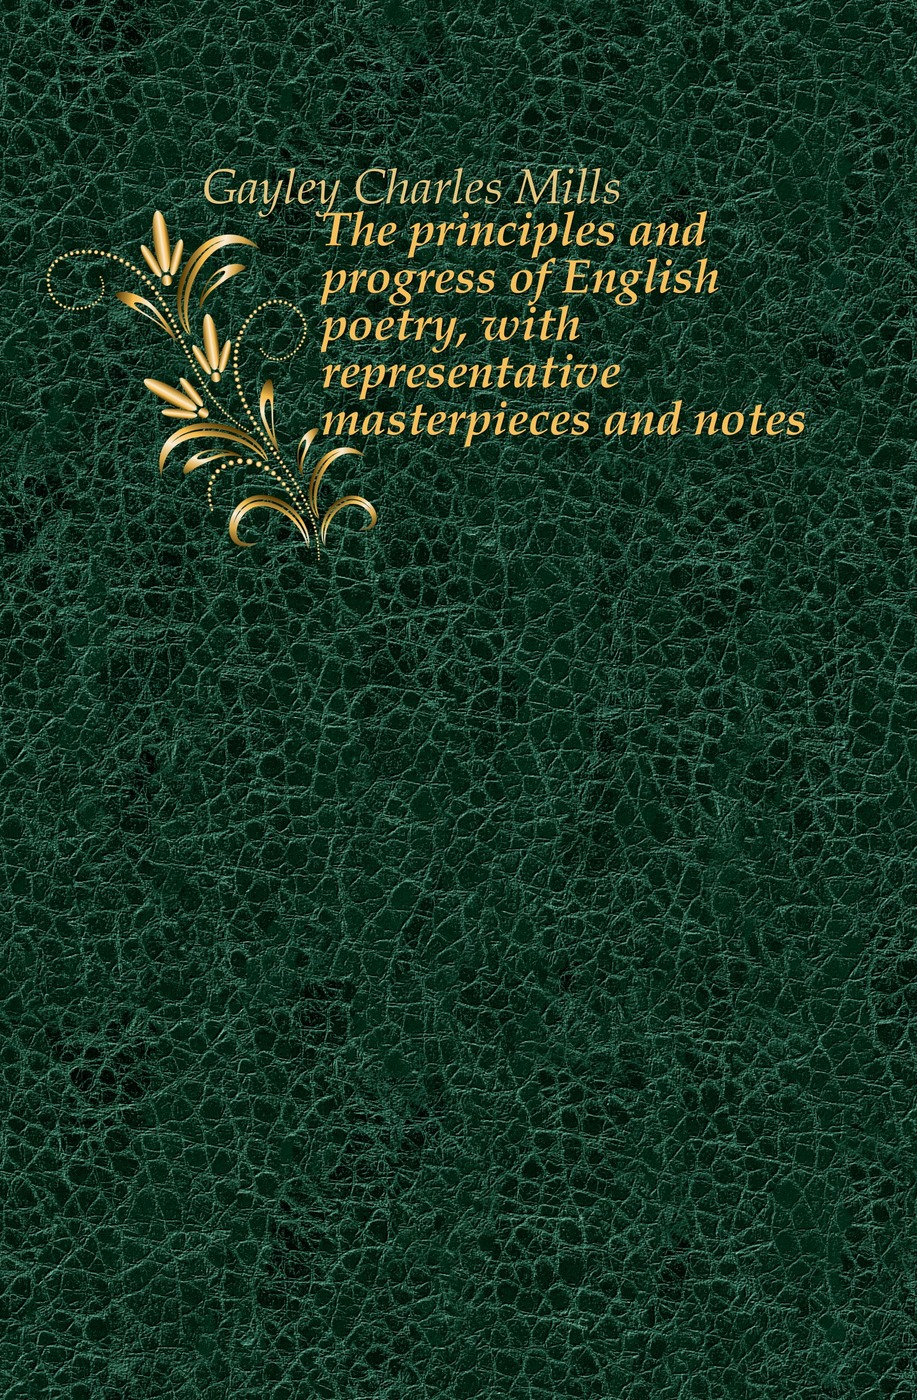 The principles and progress of English poetry, with representative masterpieces and notes